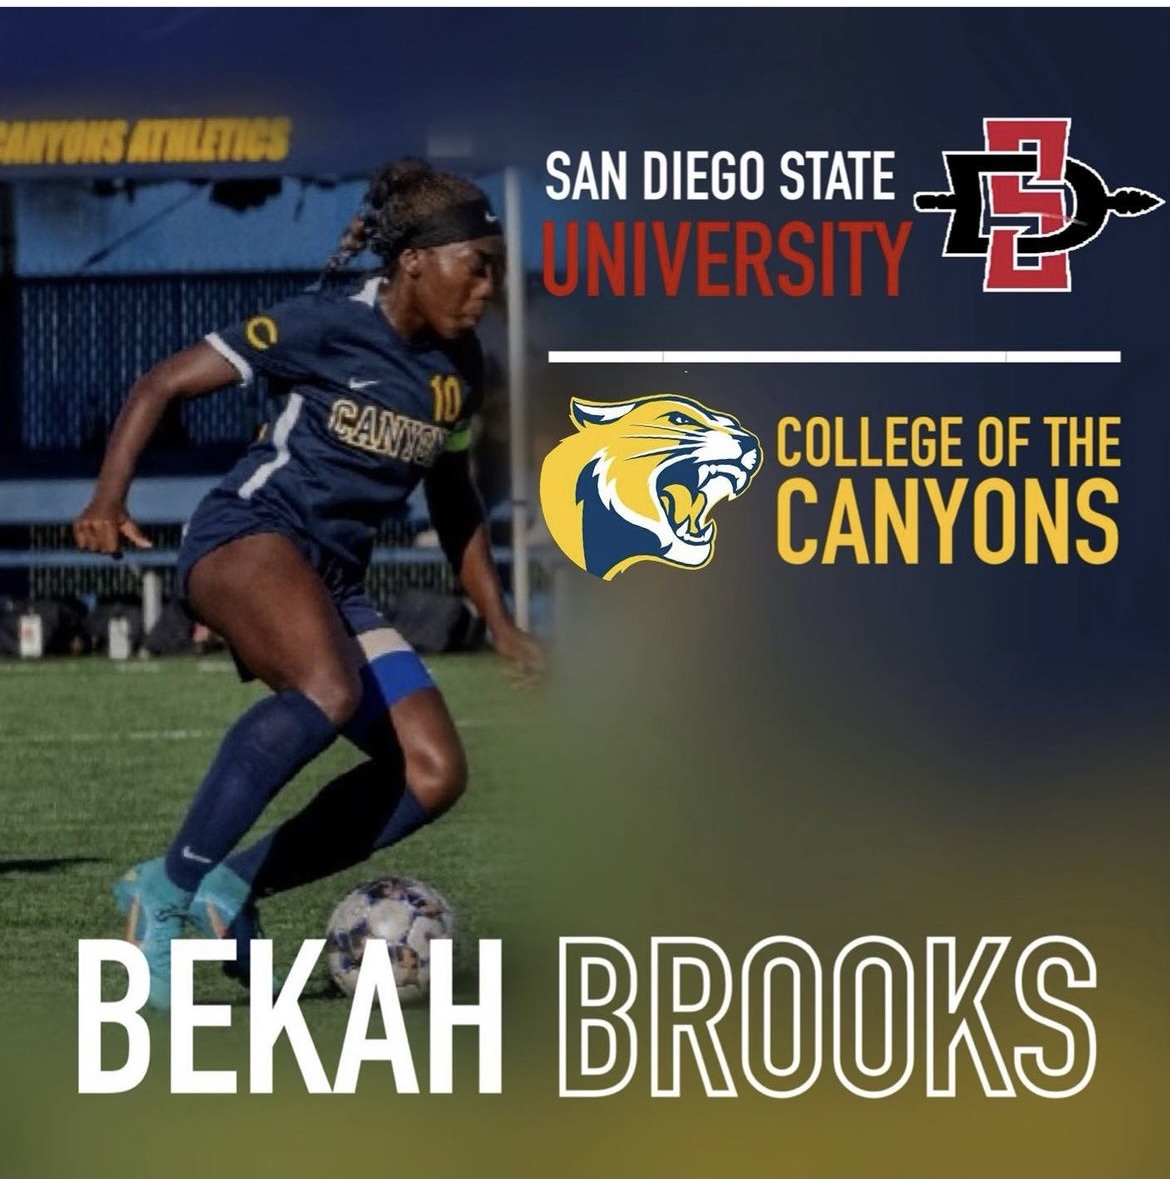 Promotional graphic featuring COC student-athlete Bekah Brooks and the athletic logos for San Diego State University and College of the Canyons.